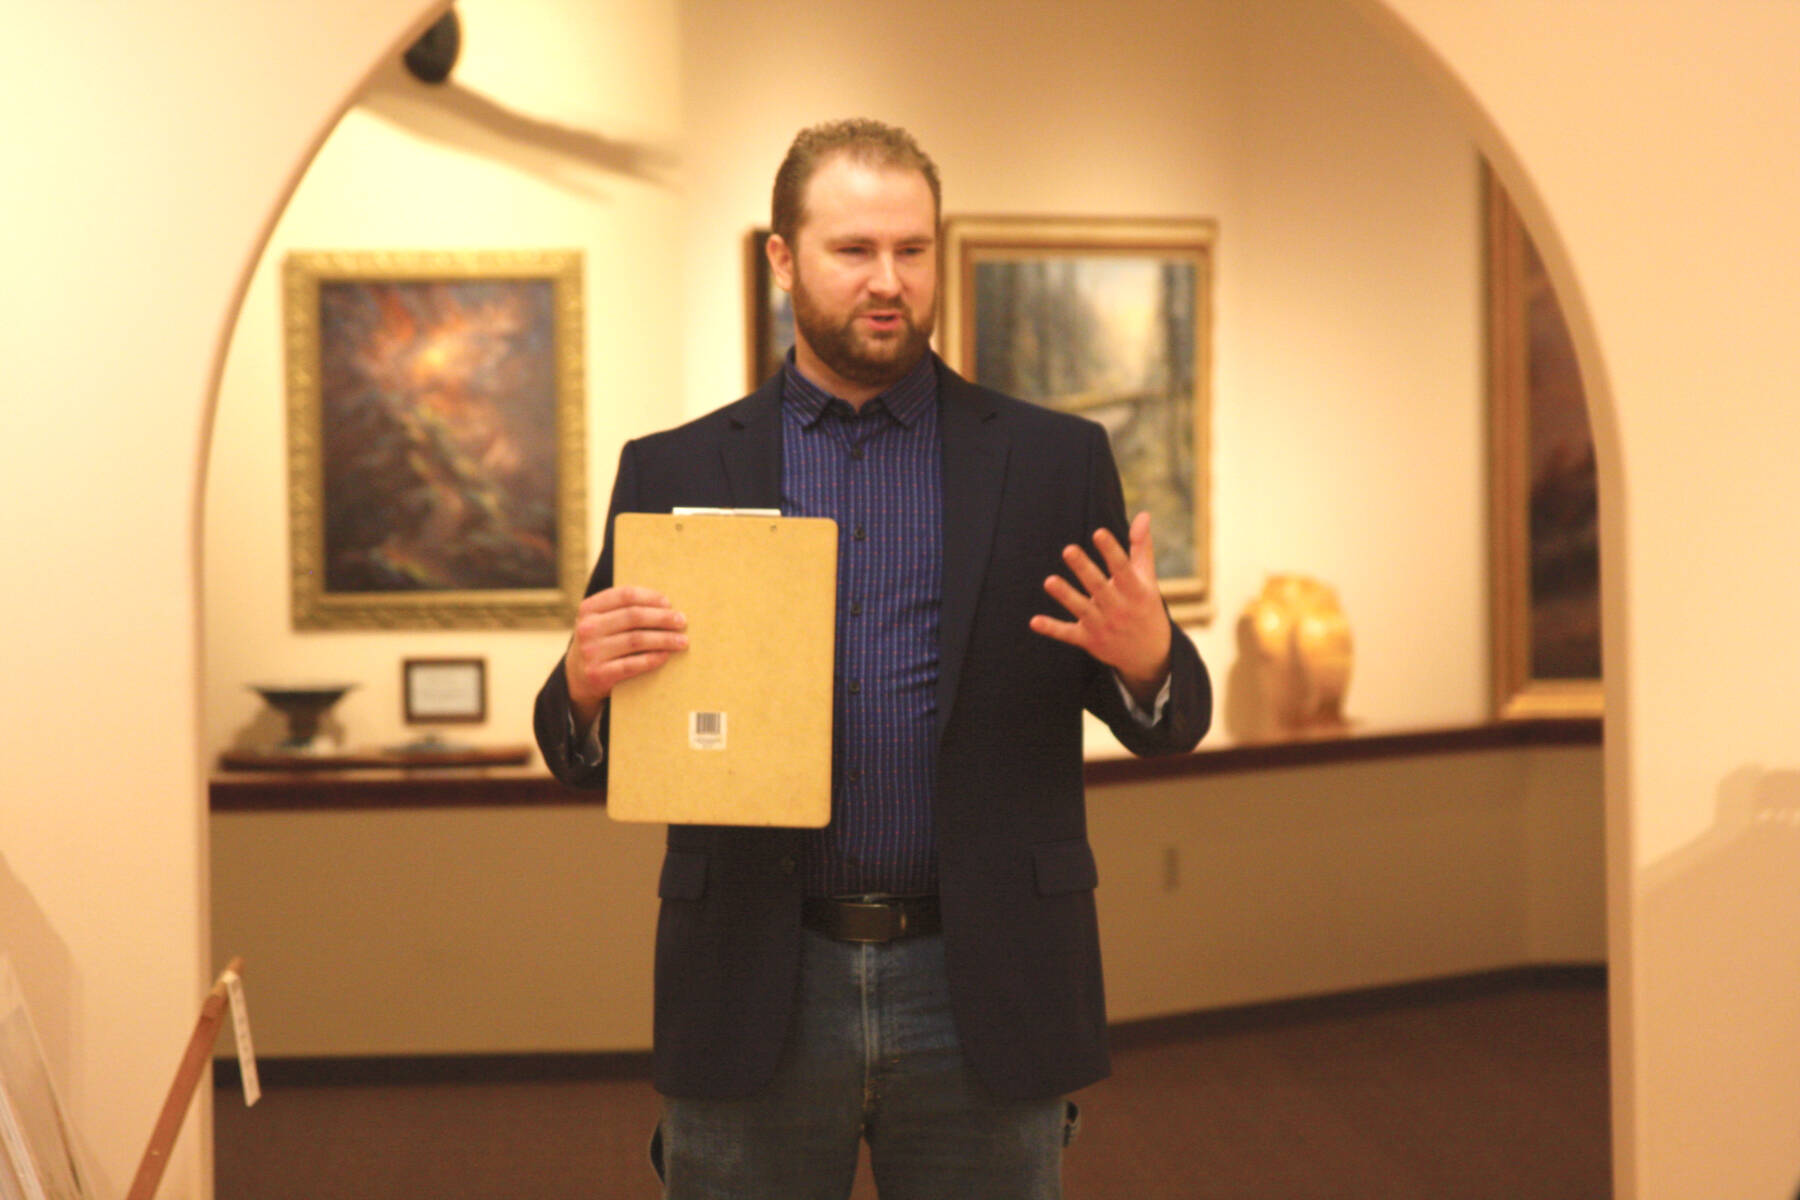 Curator Barnabas Firth welcomes attendees of the invitational gathering on Saturday, April 29, 2023 at the Norman Lowell Art Gallery in Anchor Point, Alaska. Photo by Delcenia Cosman